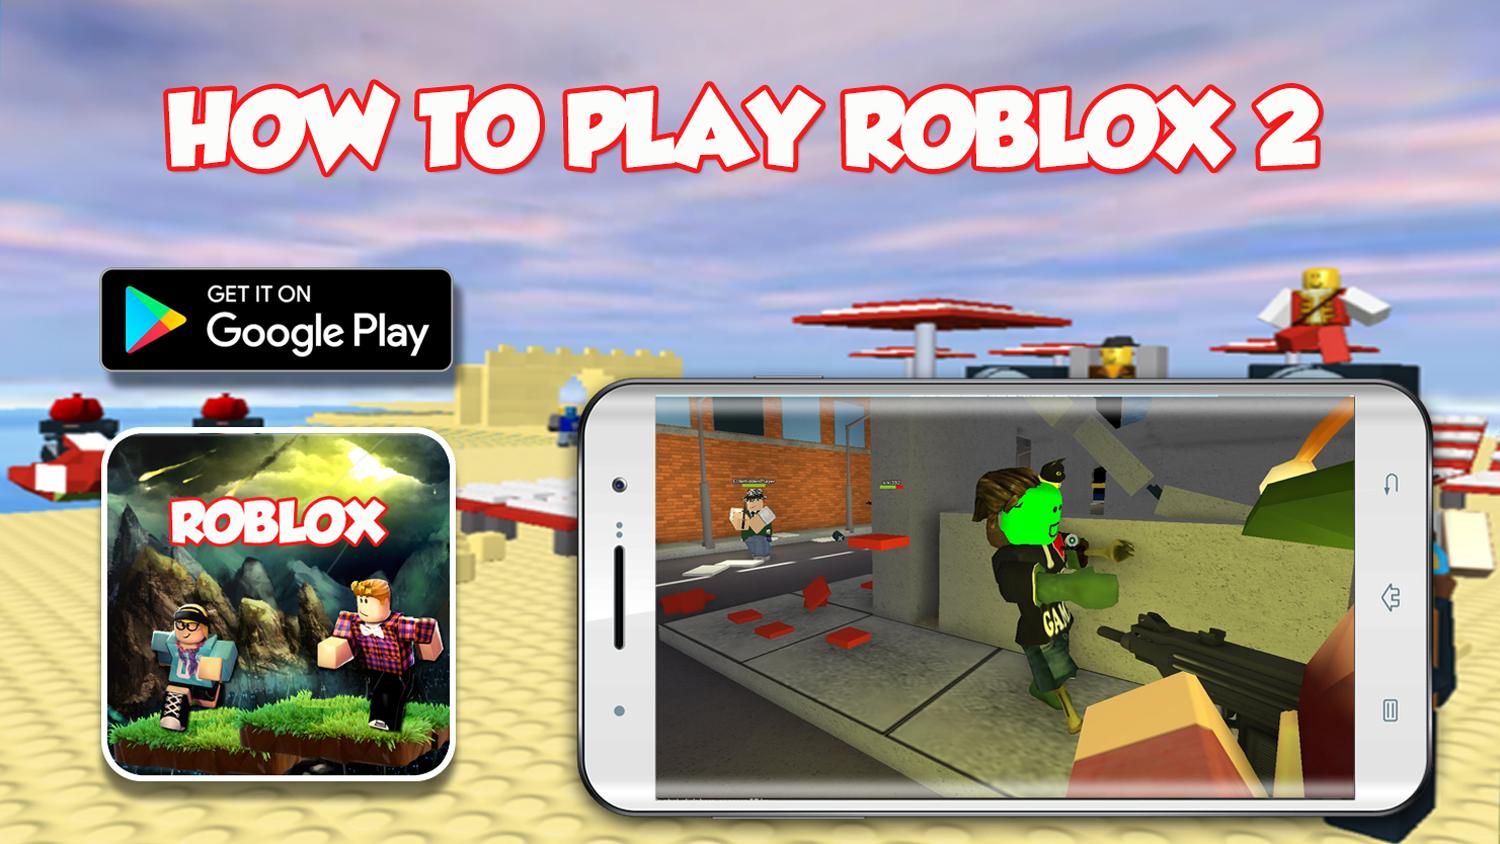 Guide For Roblox 2 Free For Android Apk Download - roblox mods roblox game guide tips hacks cheats mods apk down